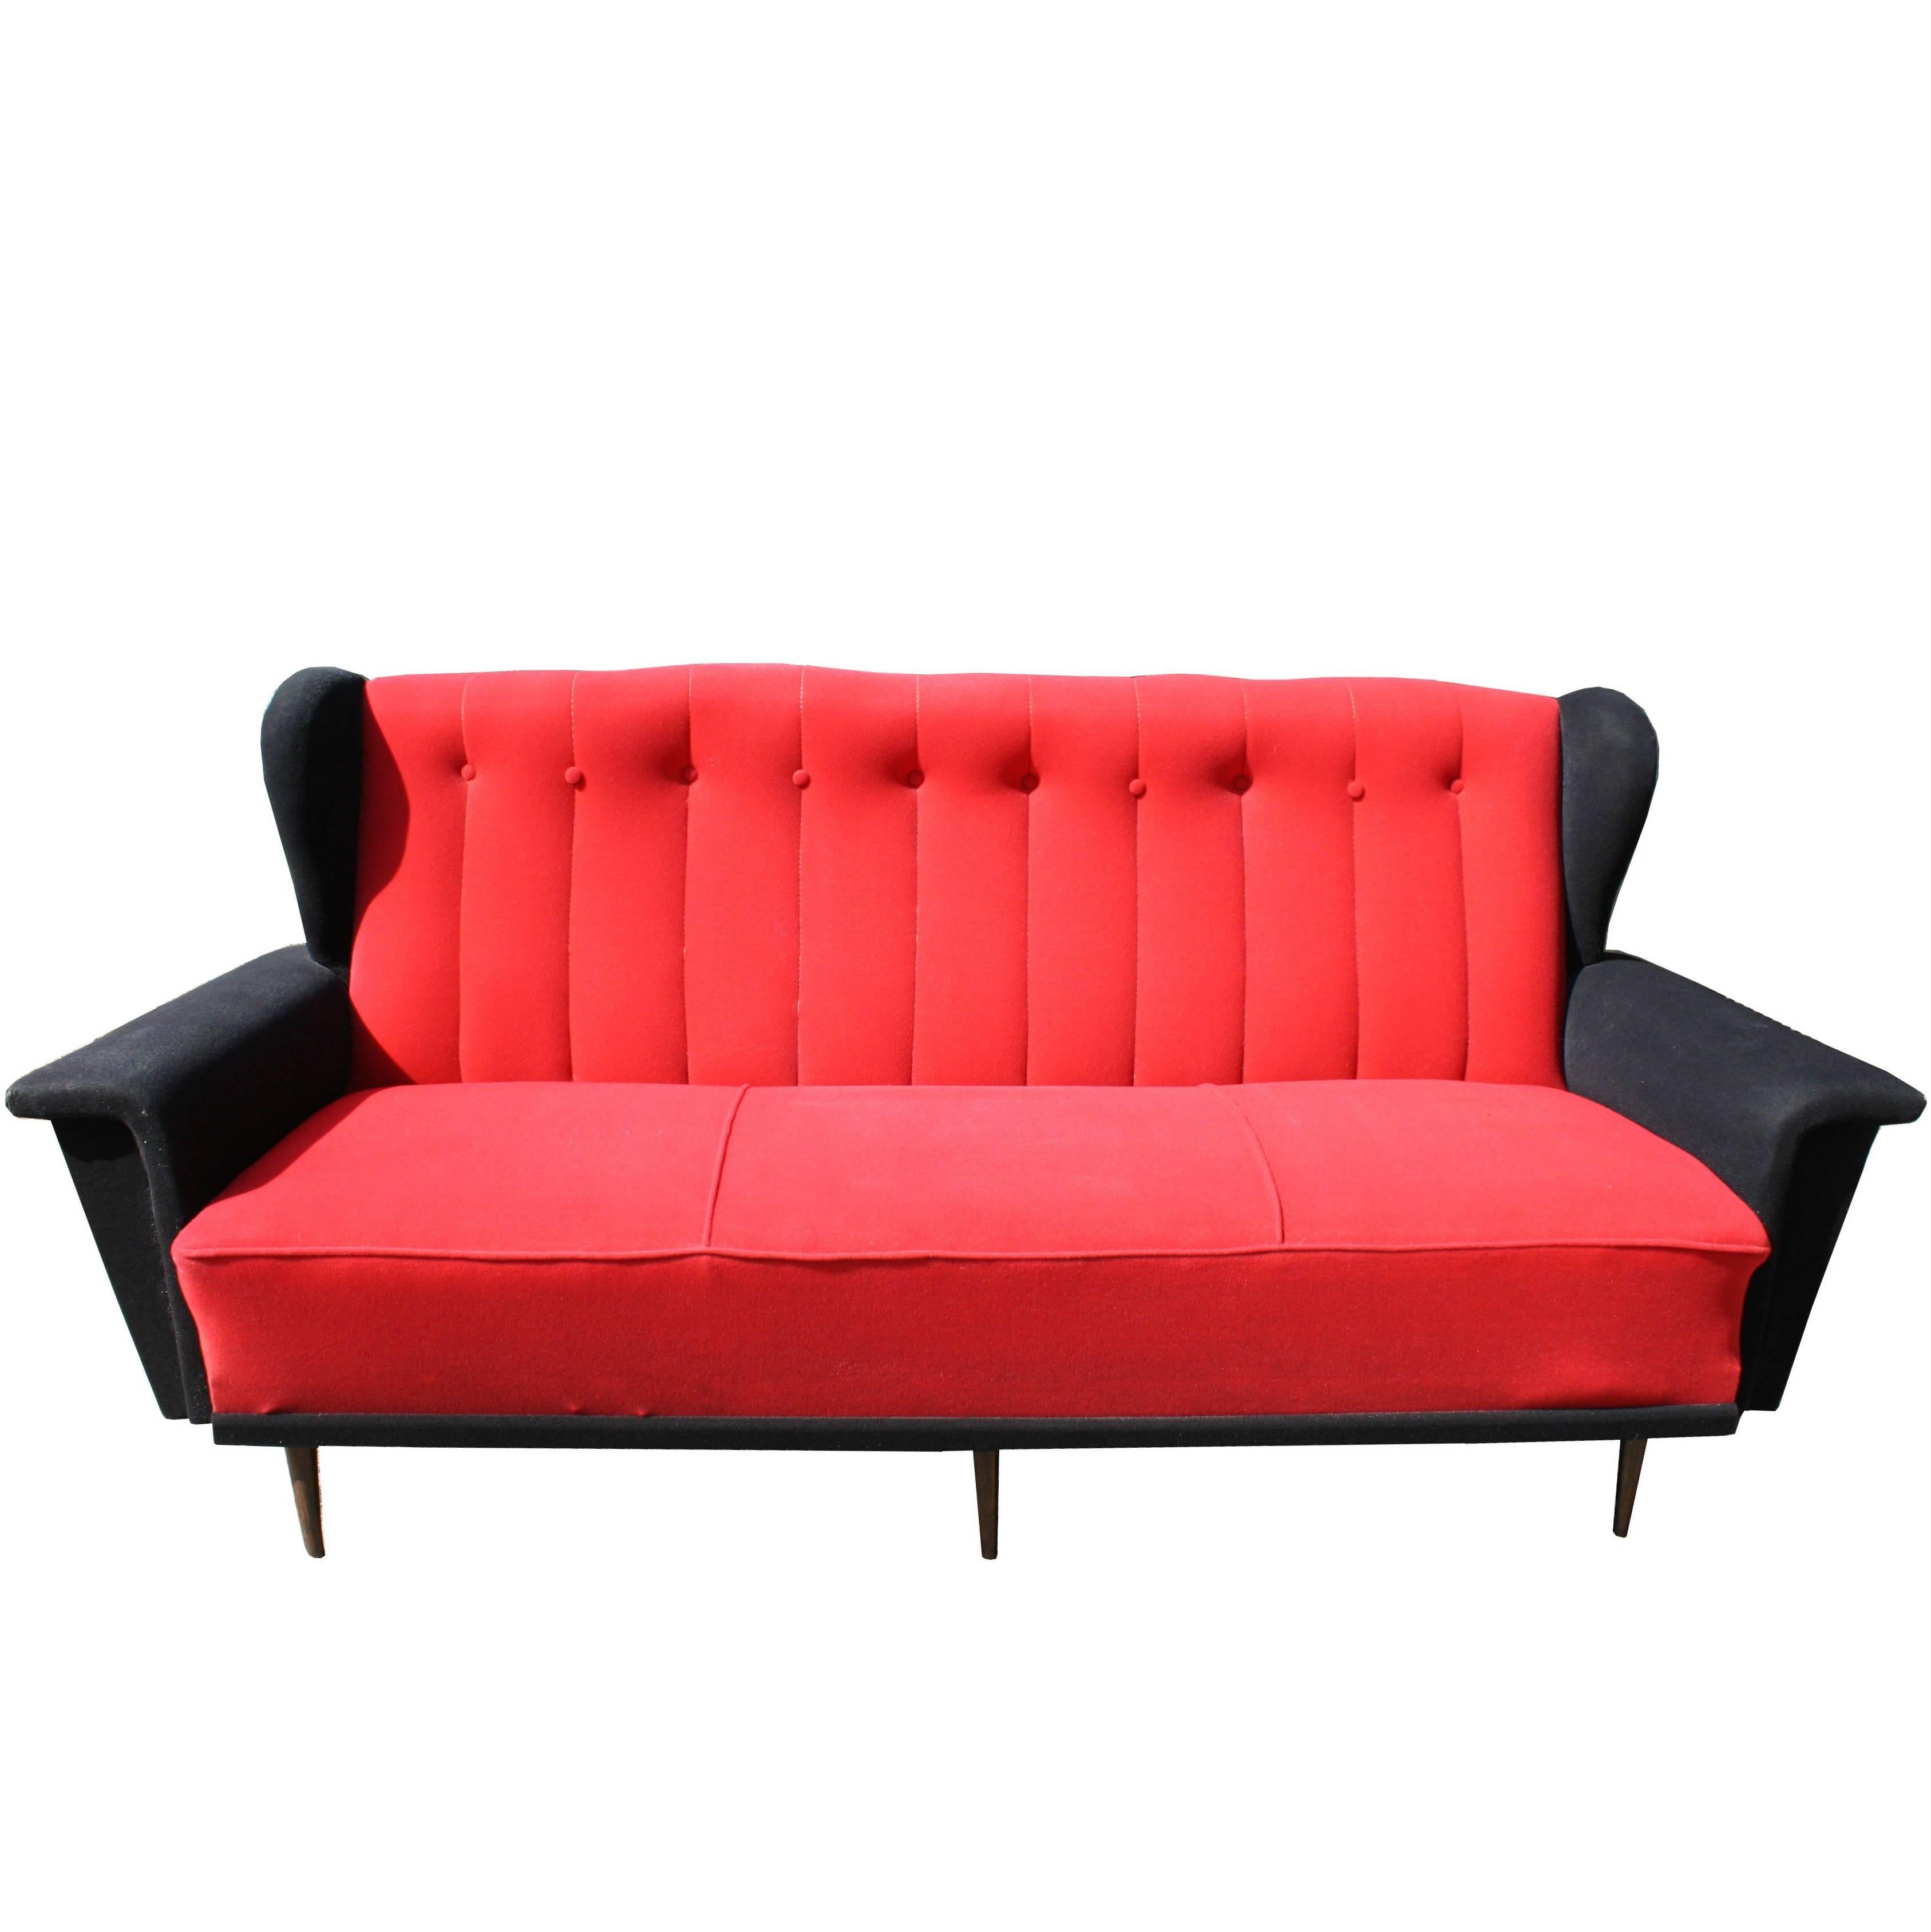 Vintage, 1950s Red and Black Bench For Sale